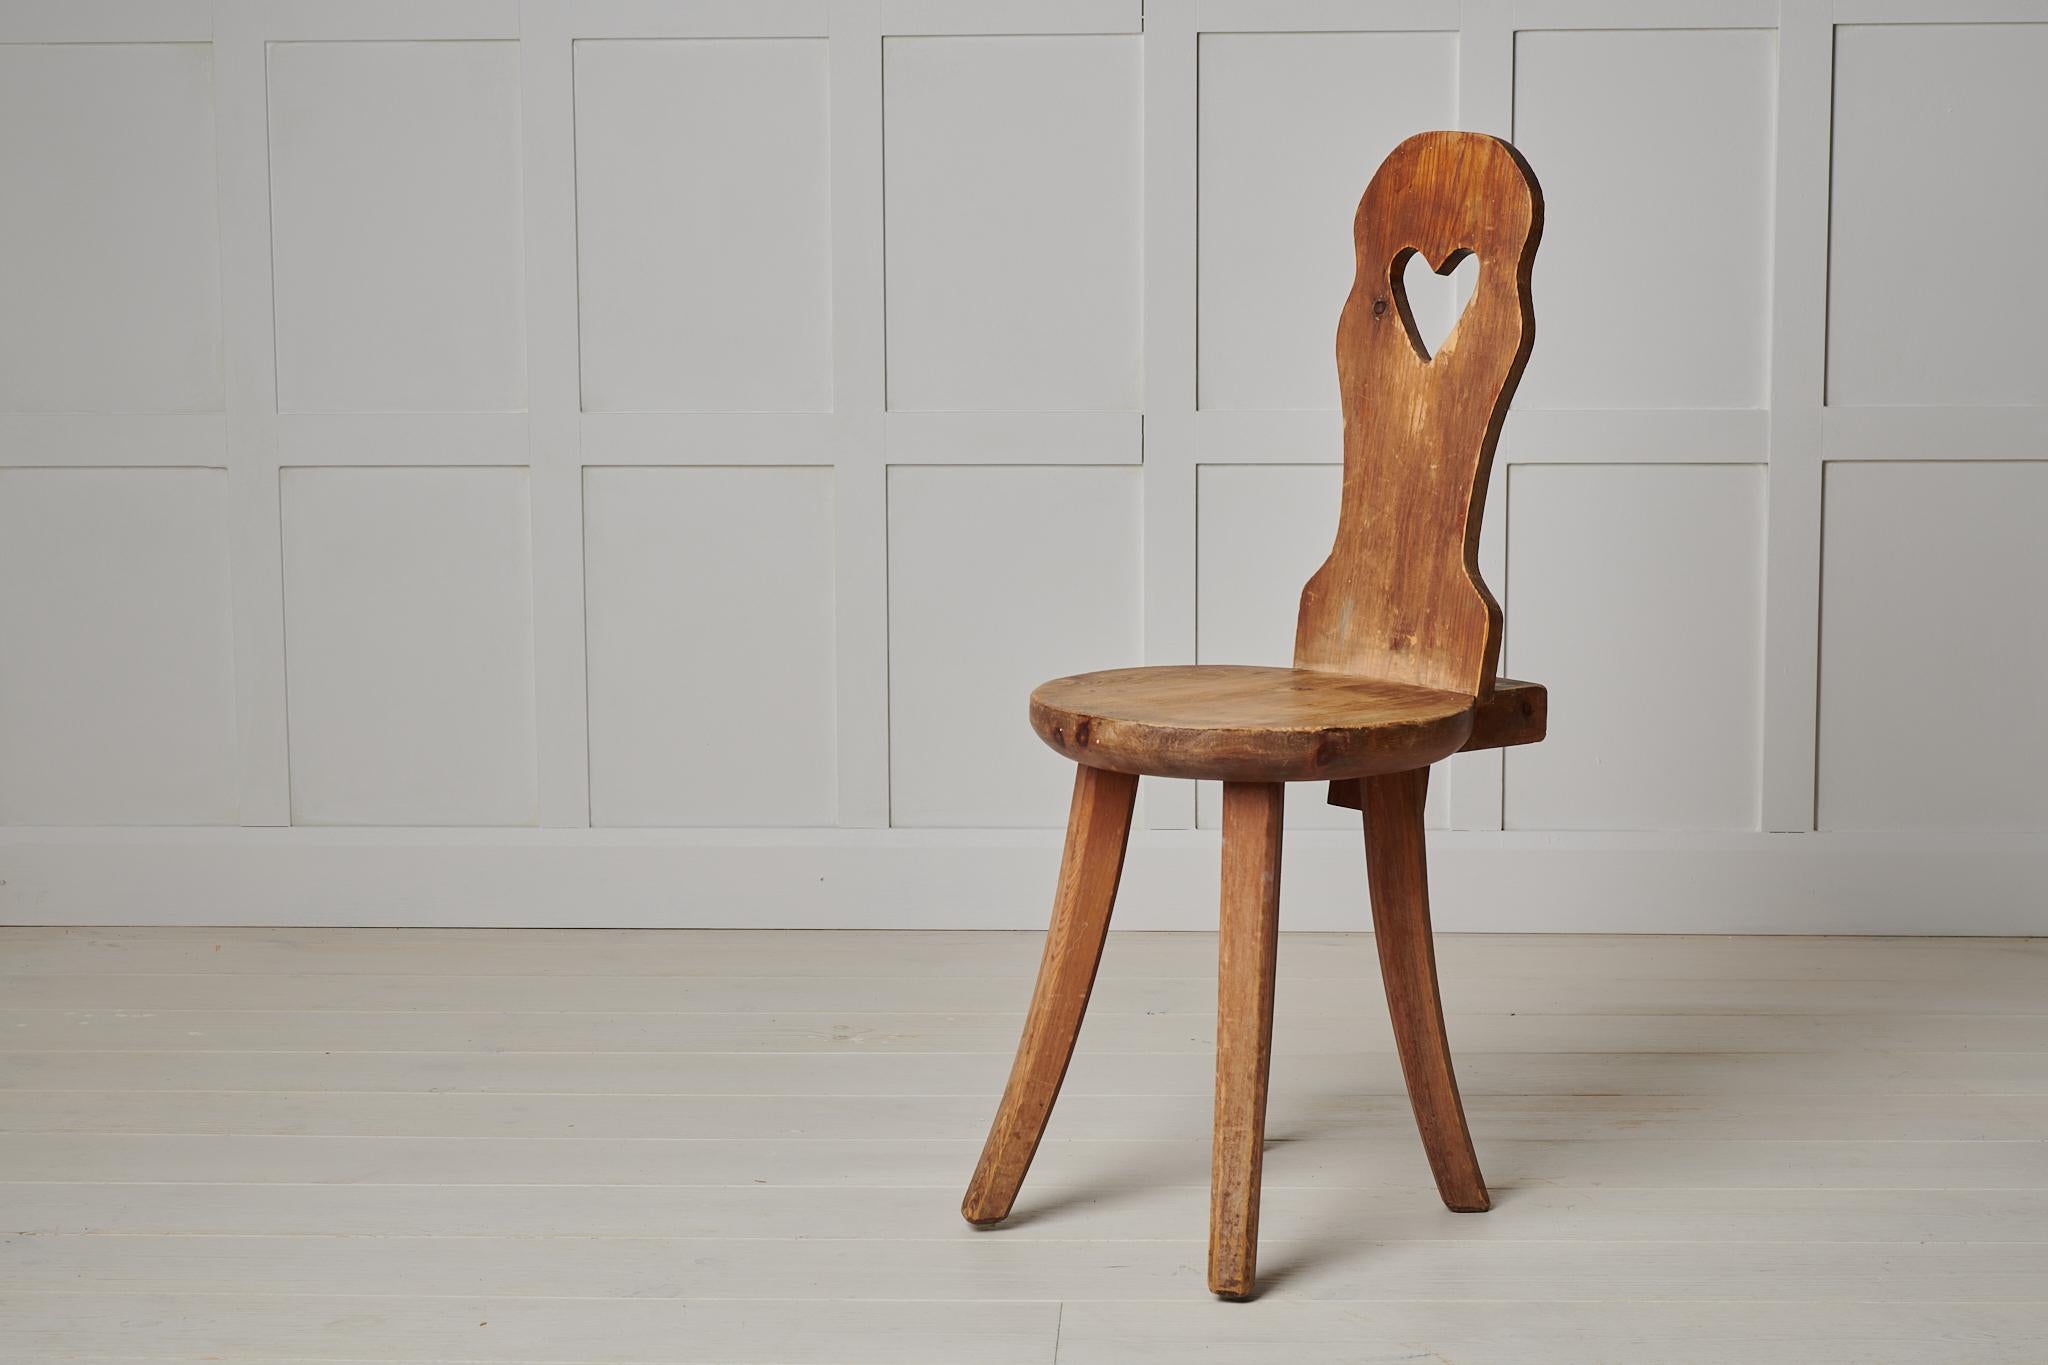 Swedish folk art chair made during the late 1800s. The chair is hand-made from pine with a heart cut out from the backrest. The chair has never been painted so the pine has aged naturally with time and use over the years to the warm colour and